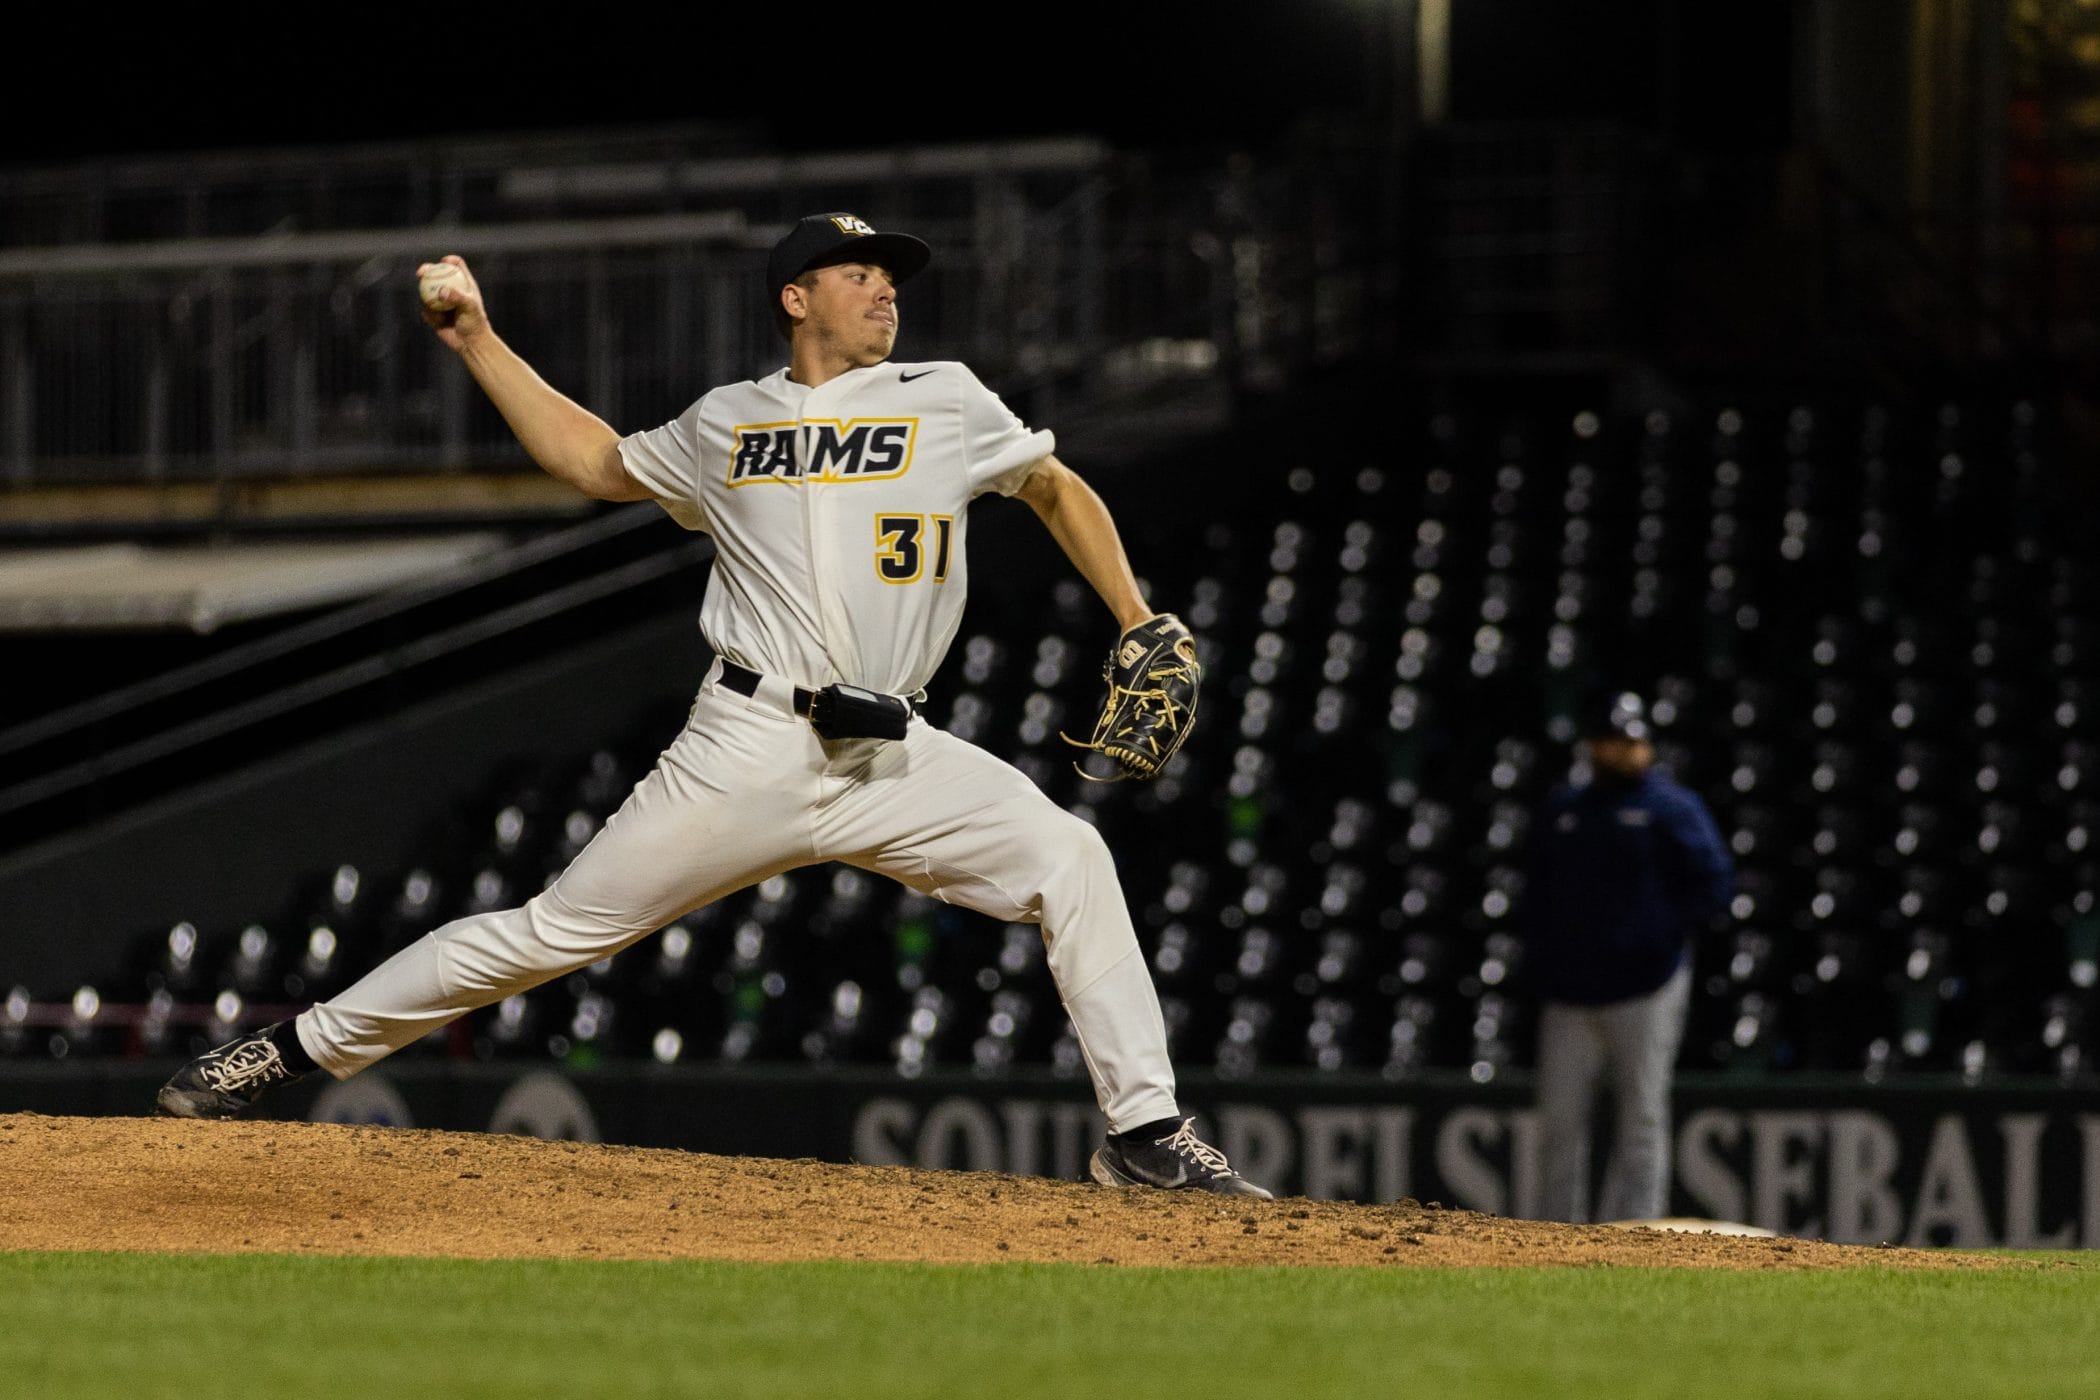 VCU men's baseball defeats Norfolk State, 13-4 The Commonwealth Times